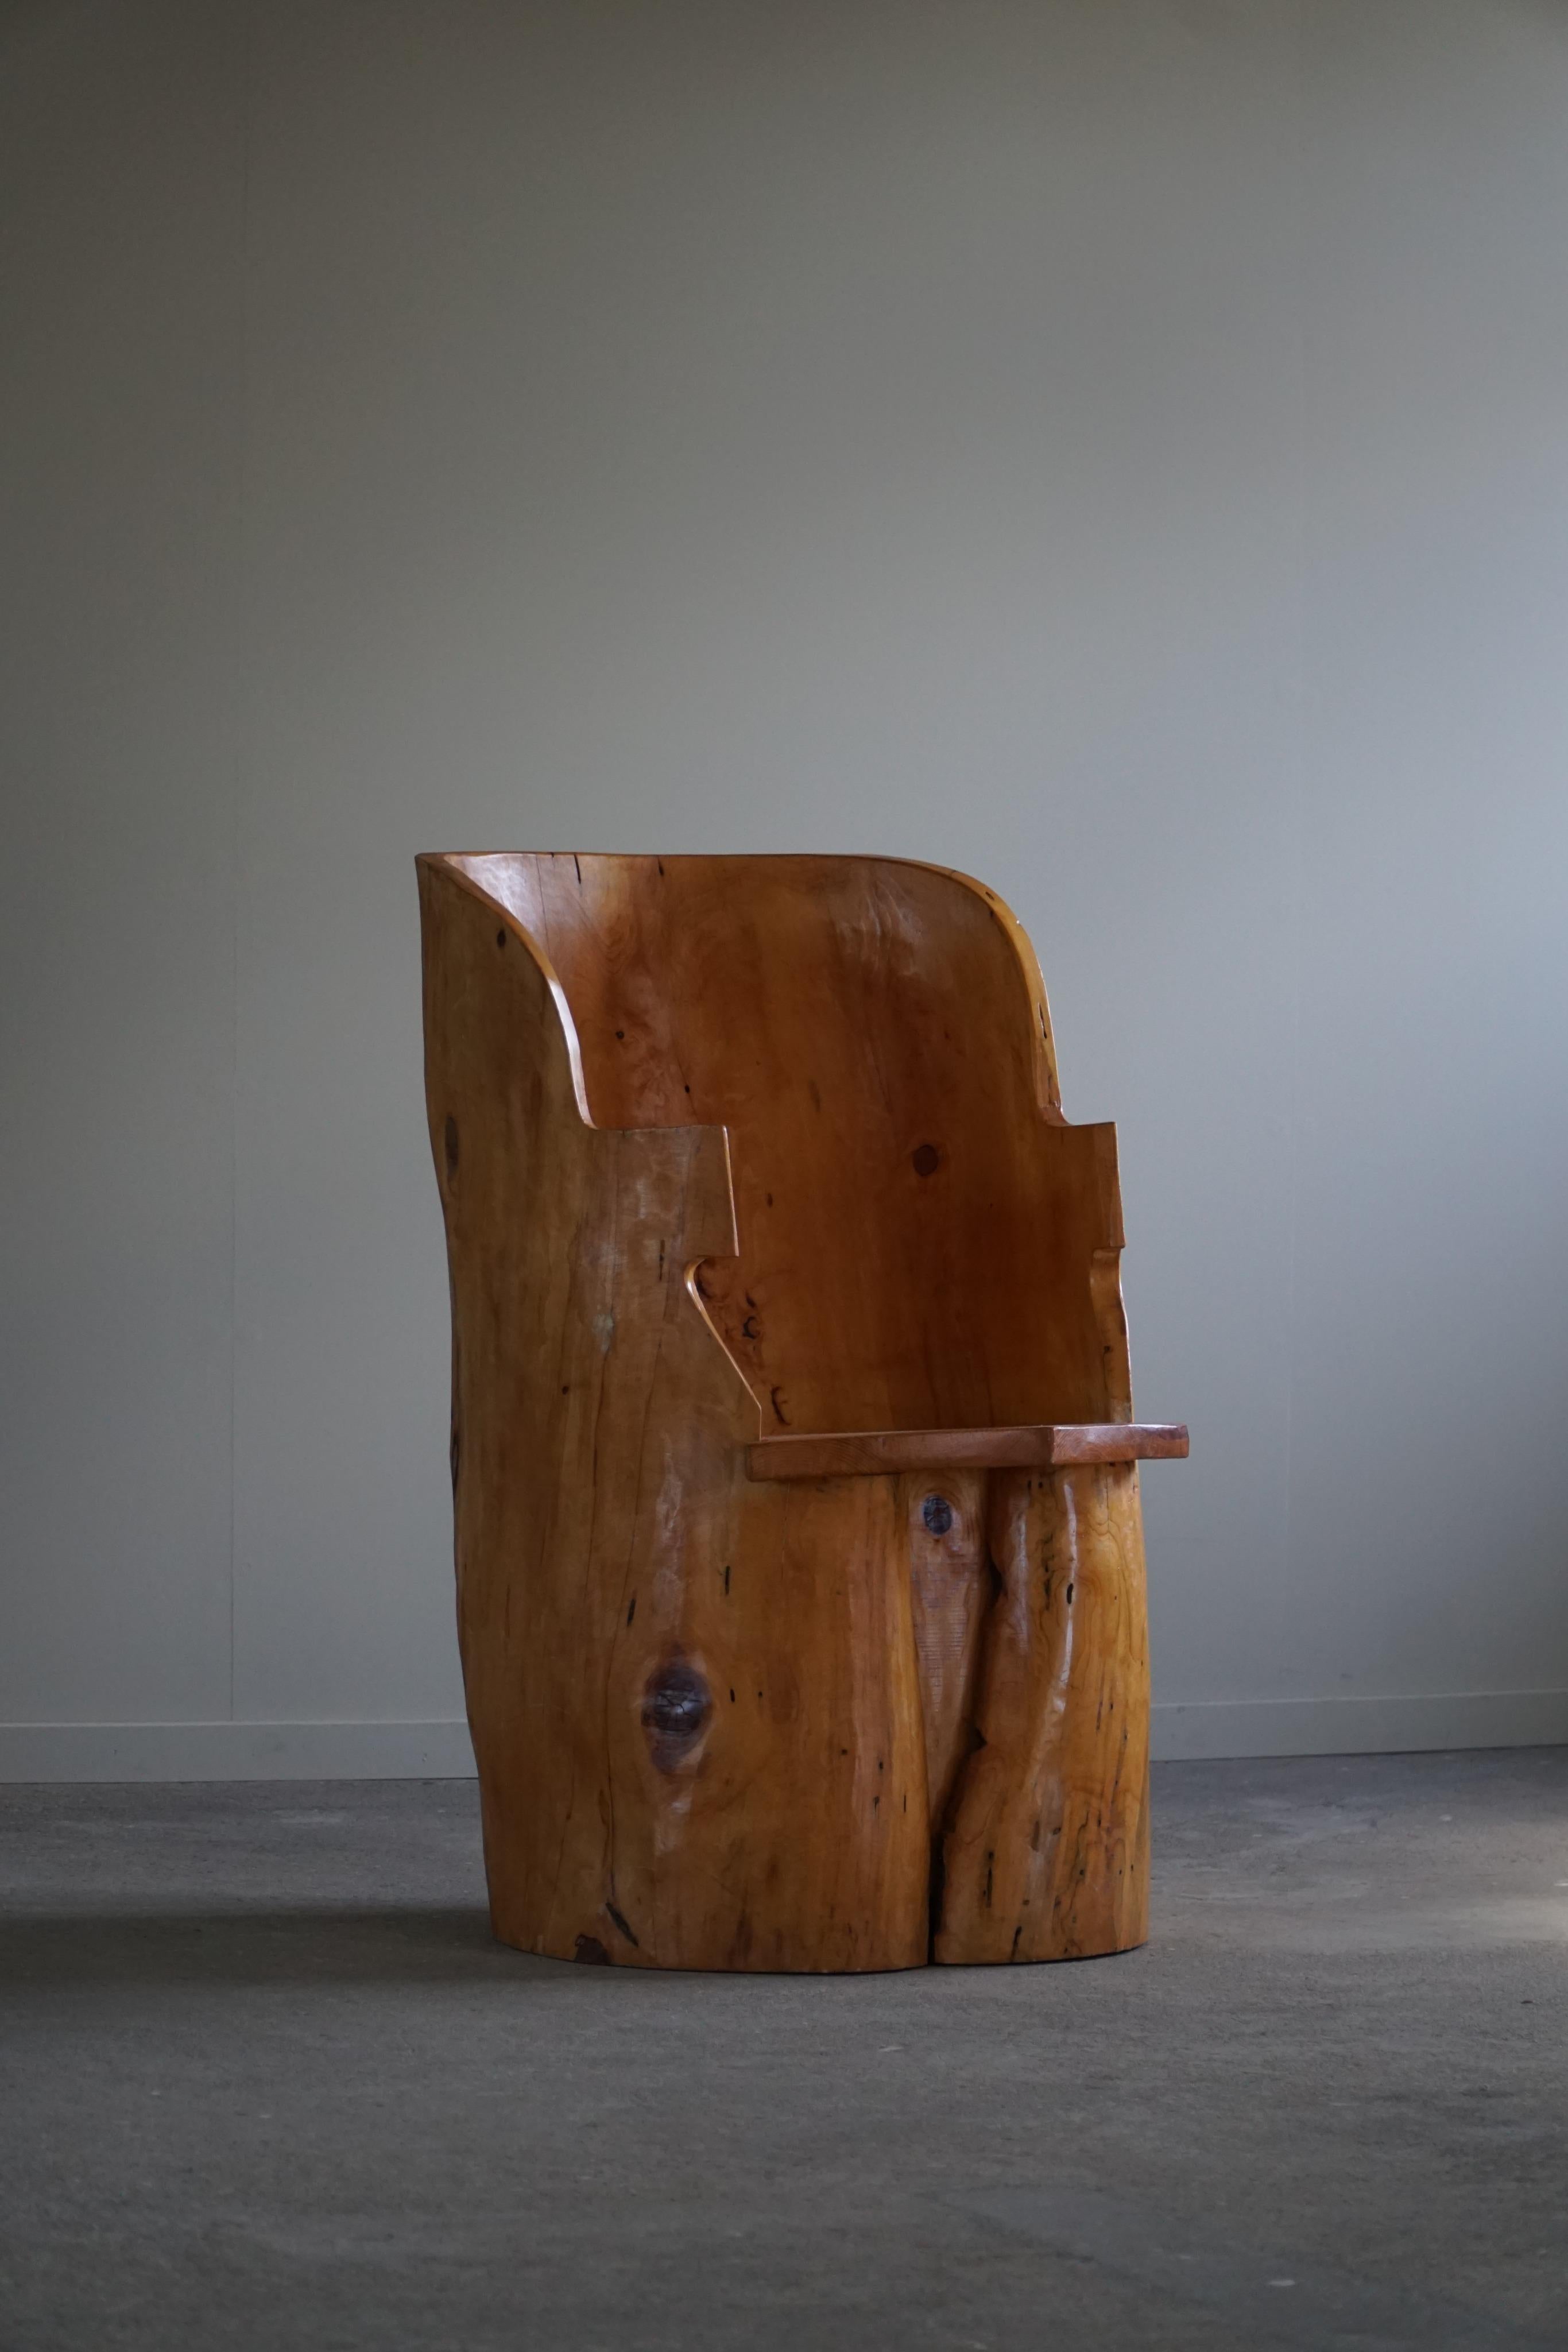 Stump Chair in Solid Birch by a Swedish Cabinetmaker, Wabi Sabi, 1950s For Sale 11